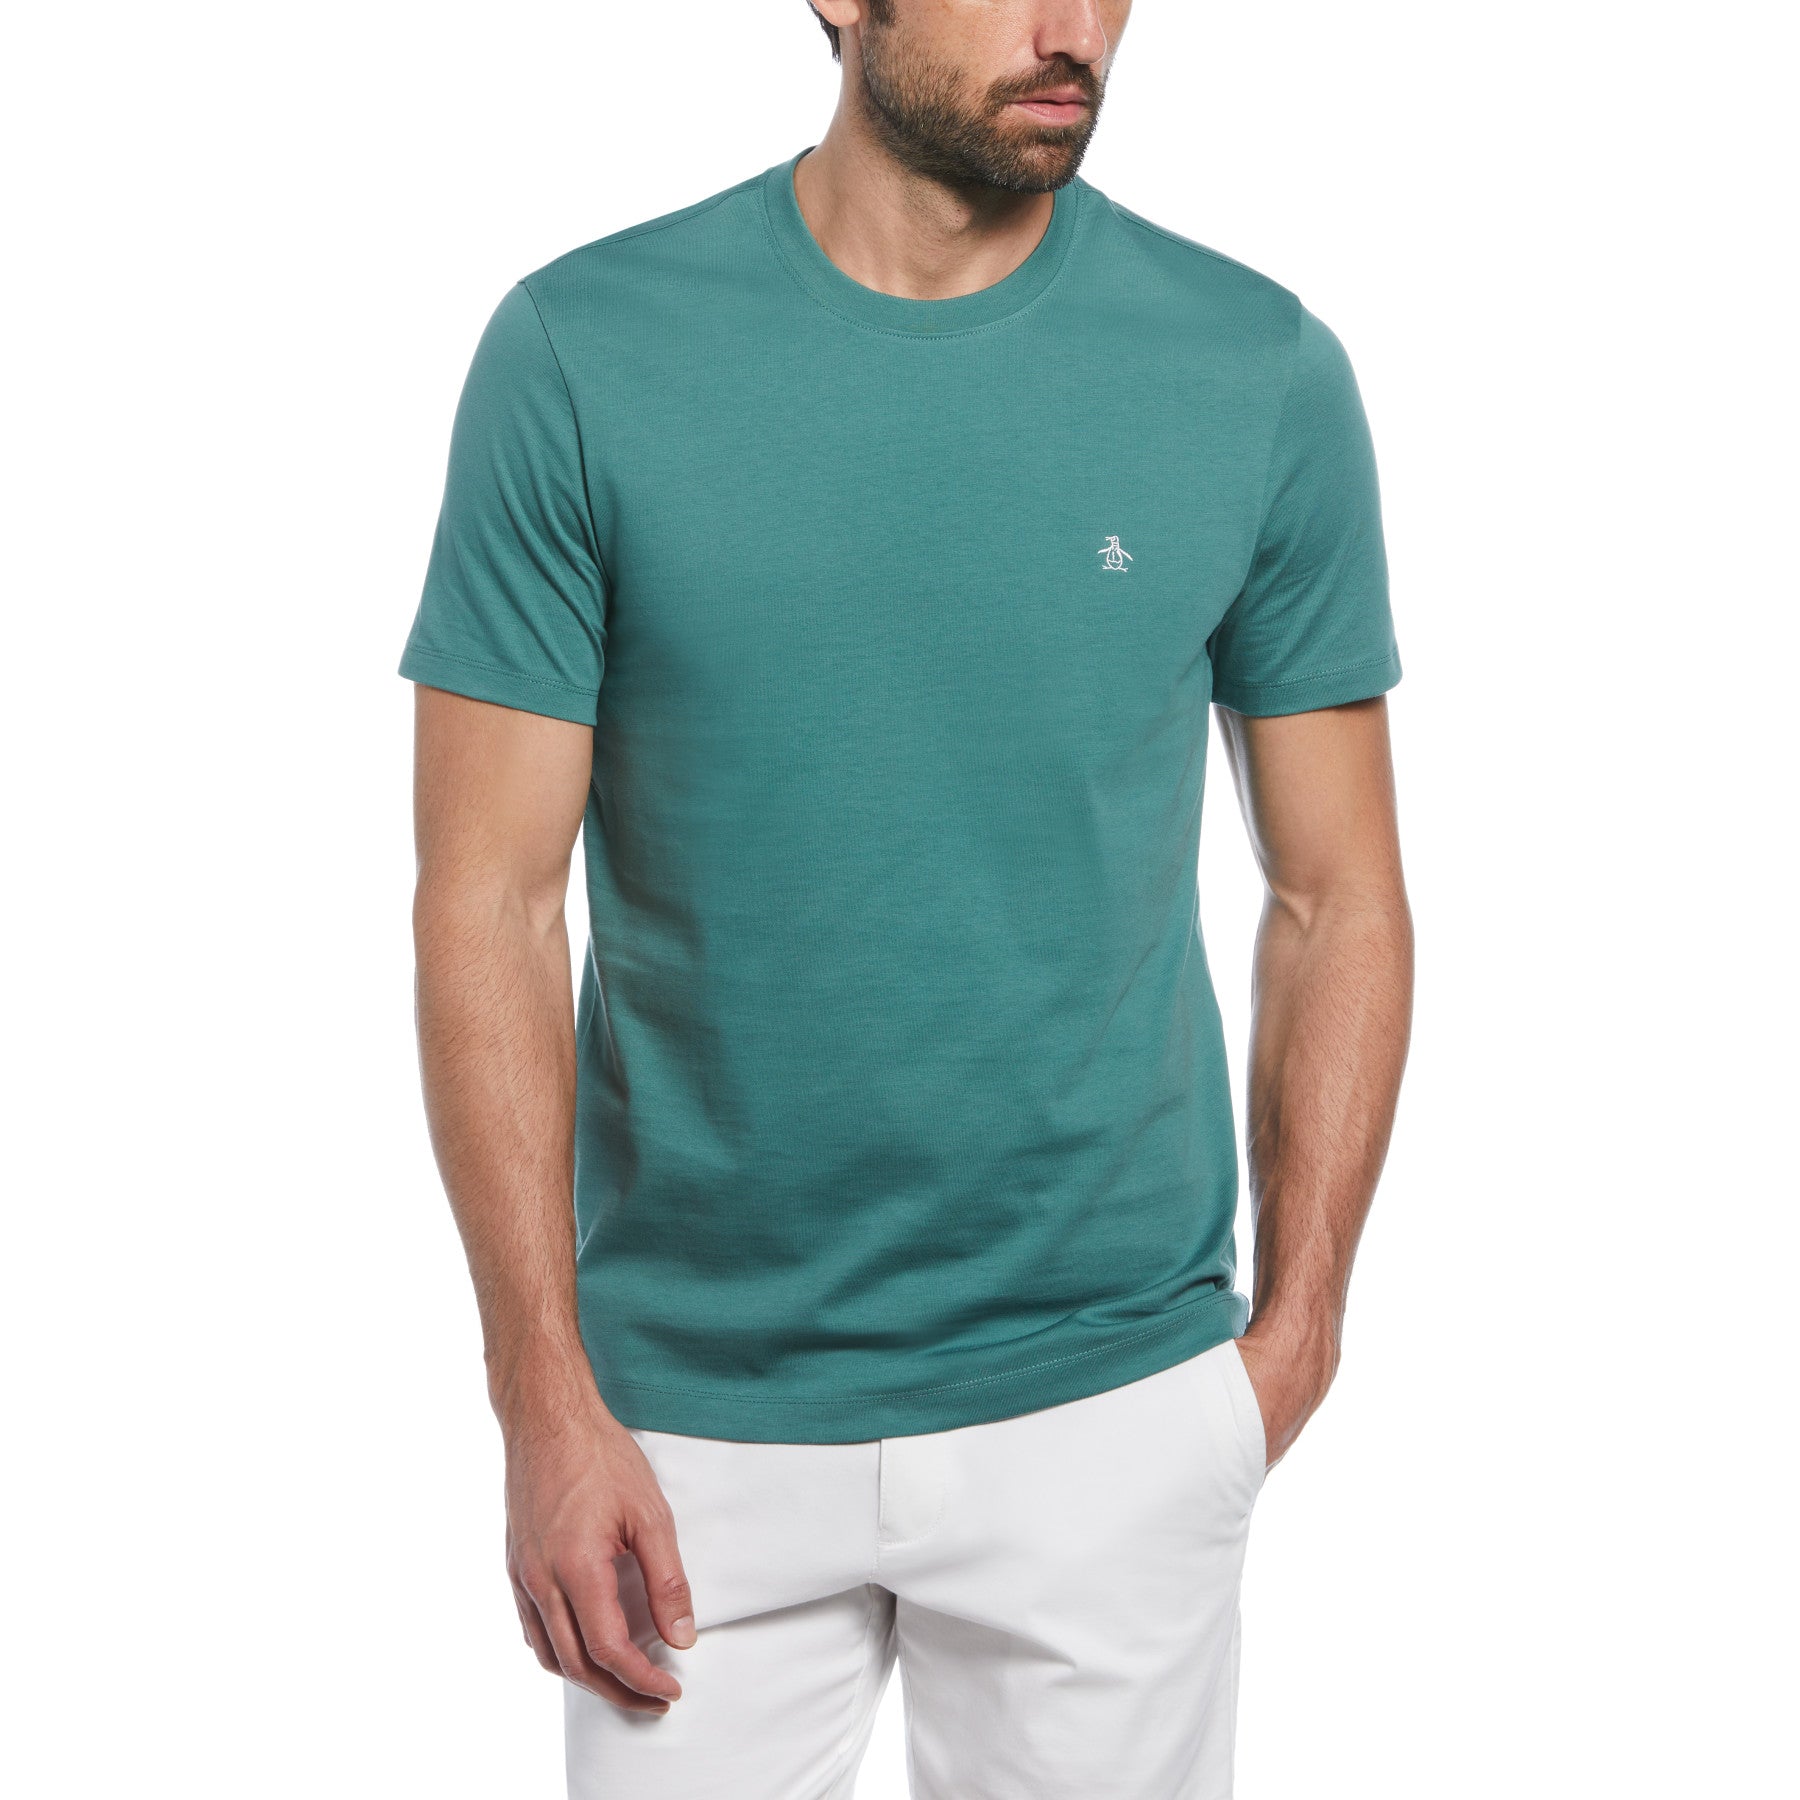 View Pin Point Embroidered Pete TShirt In Sea Pine information